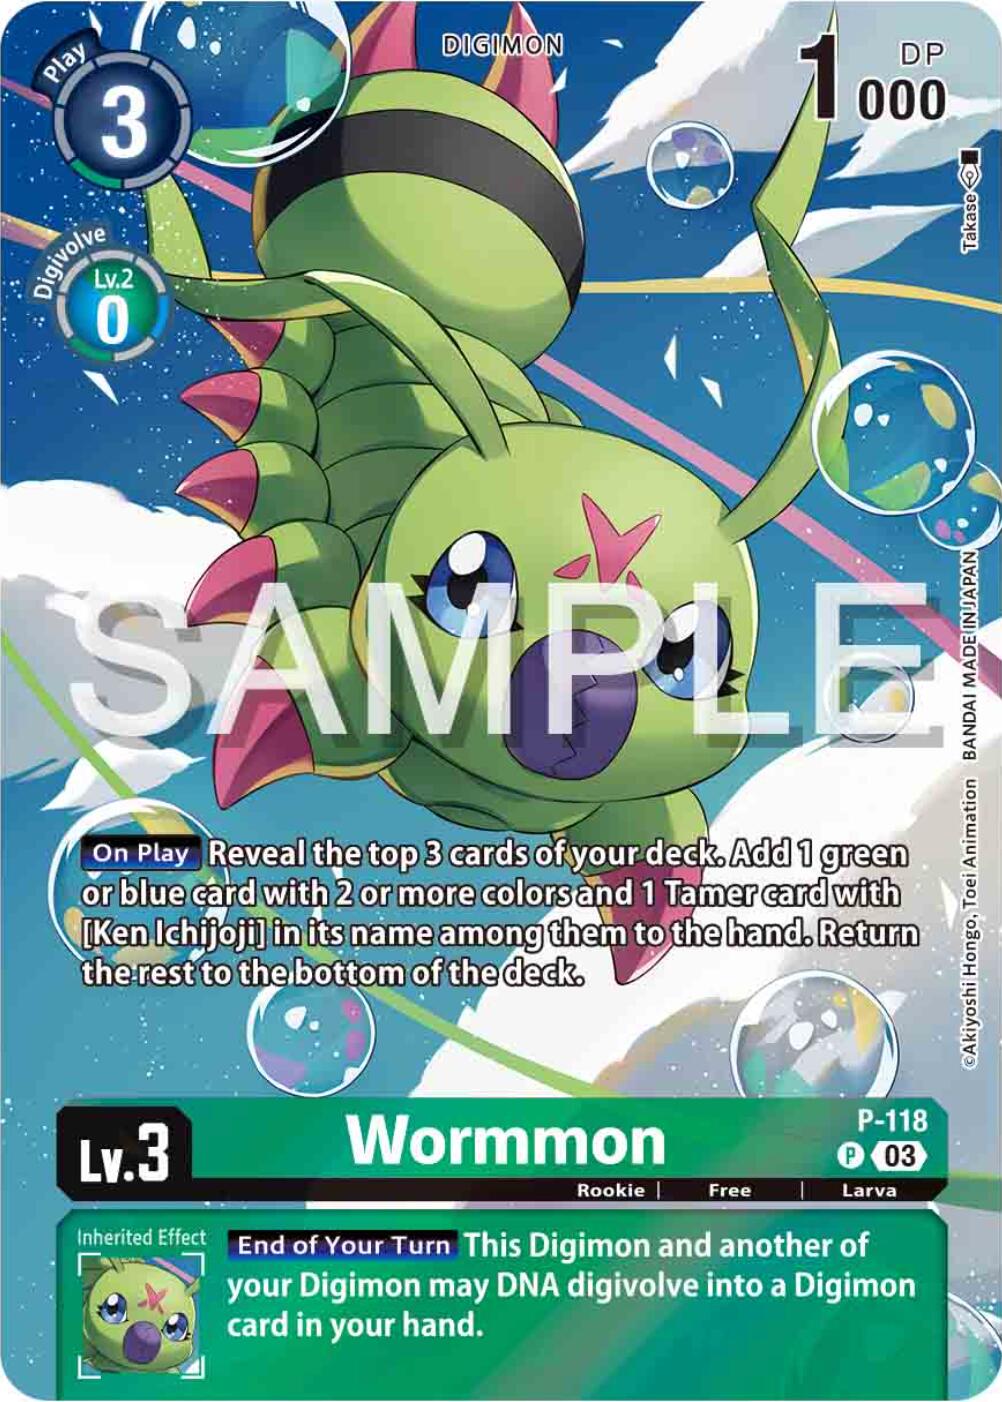 Wormmon [P-118] (Digimon Adventure 02: The Beginning Set) [Promotional Cards] | Anubis Games and Hobby